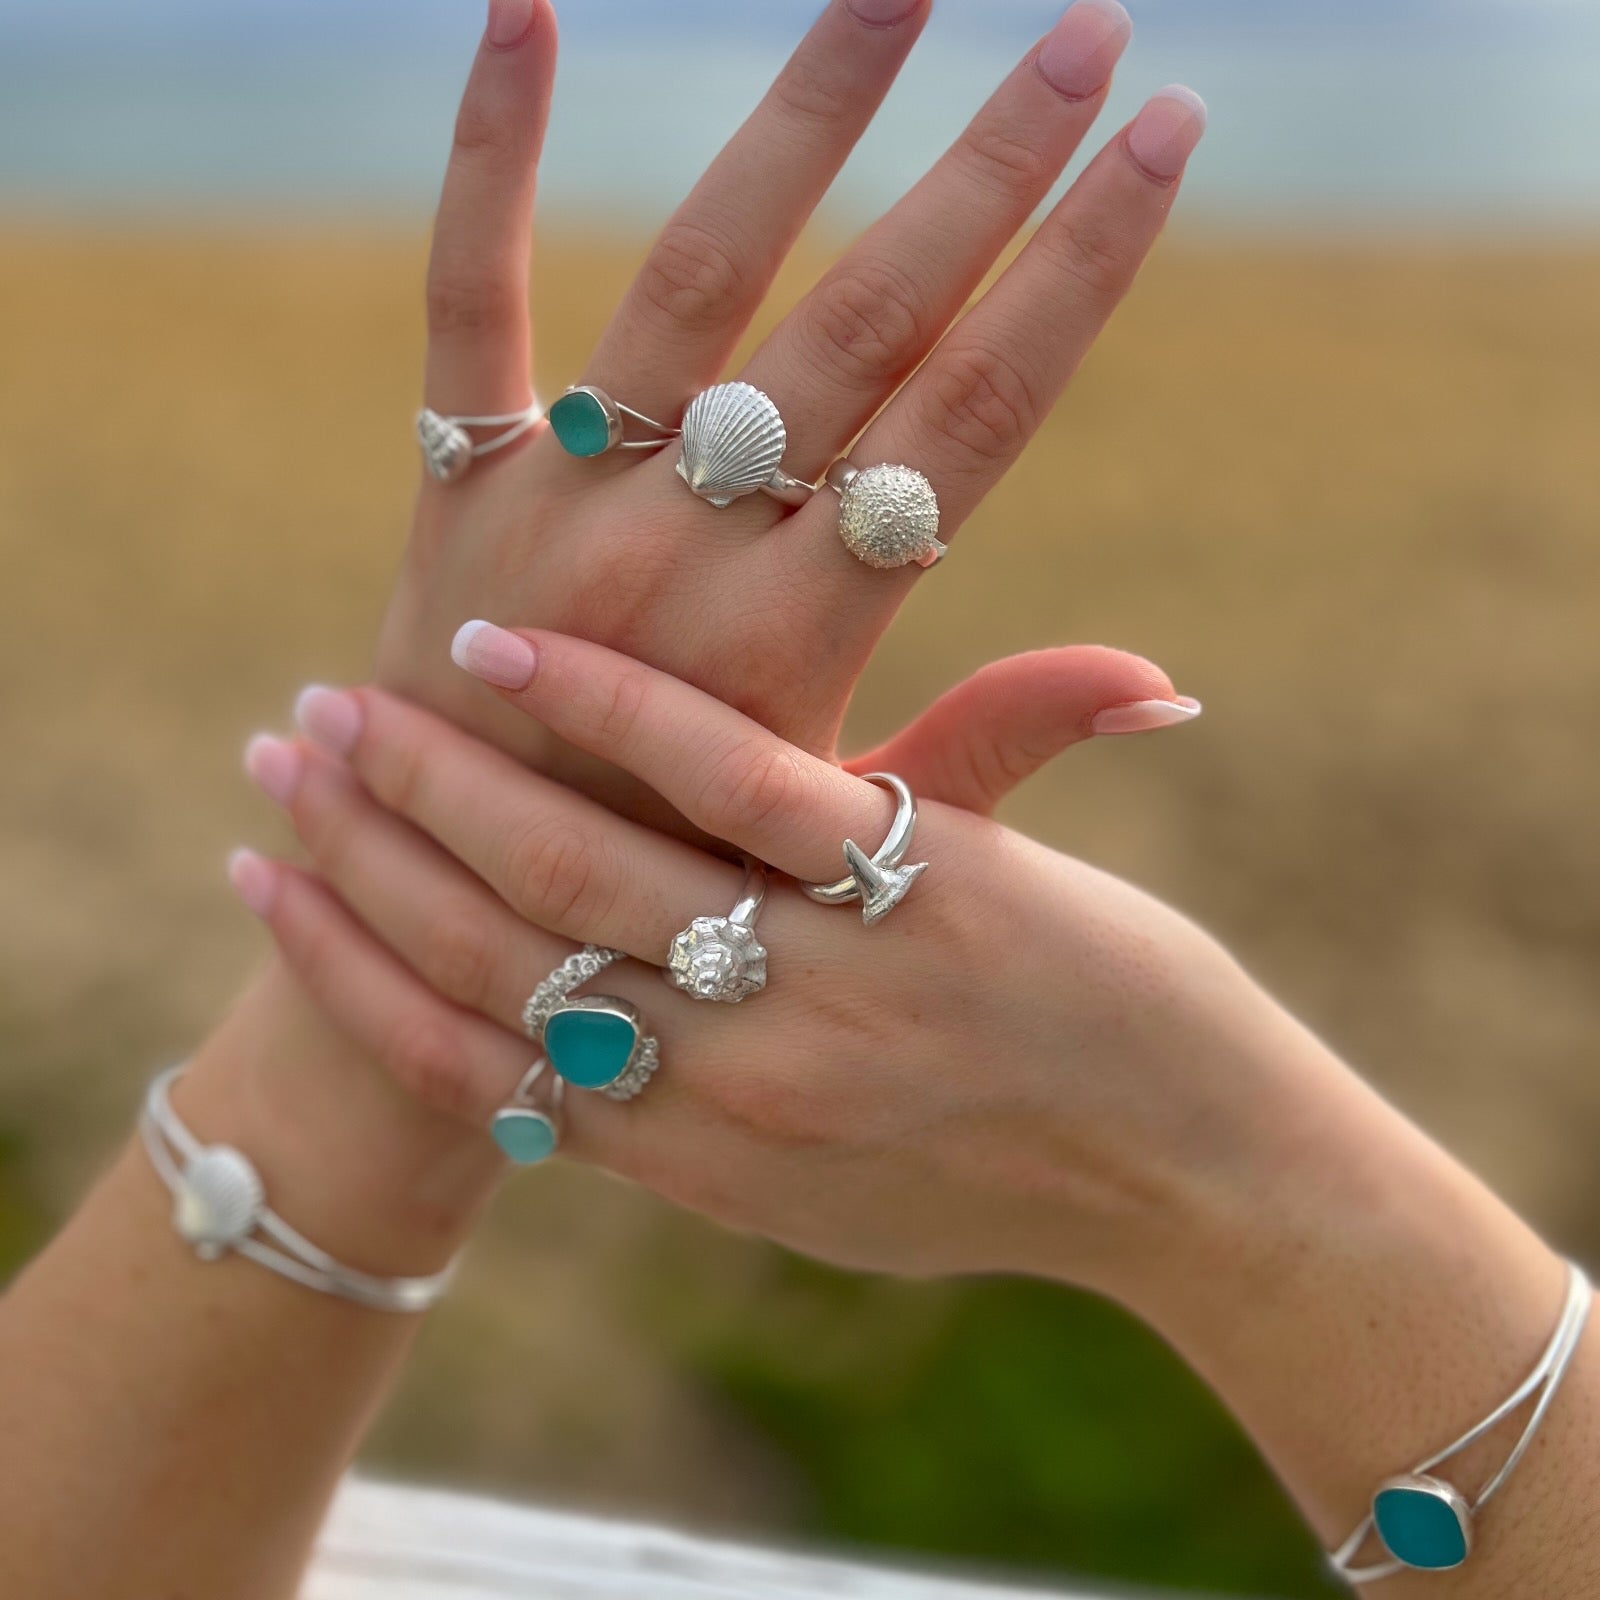 Hands modelling sea glass and cast silver shell rings and bangles by Mornington Sea Glass